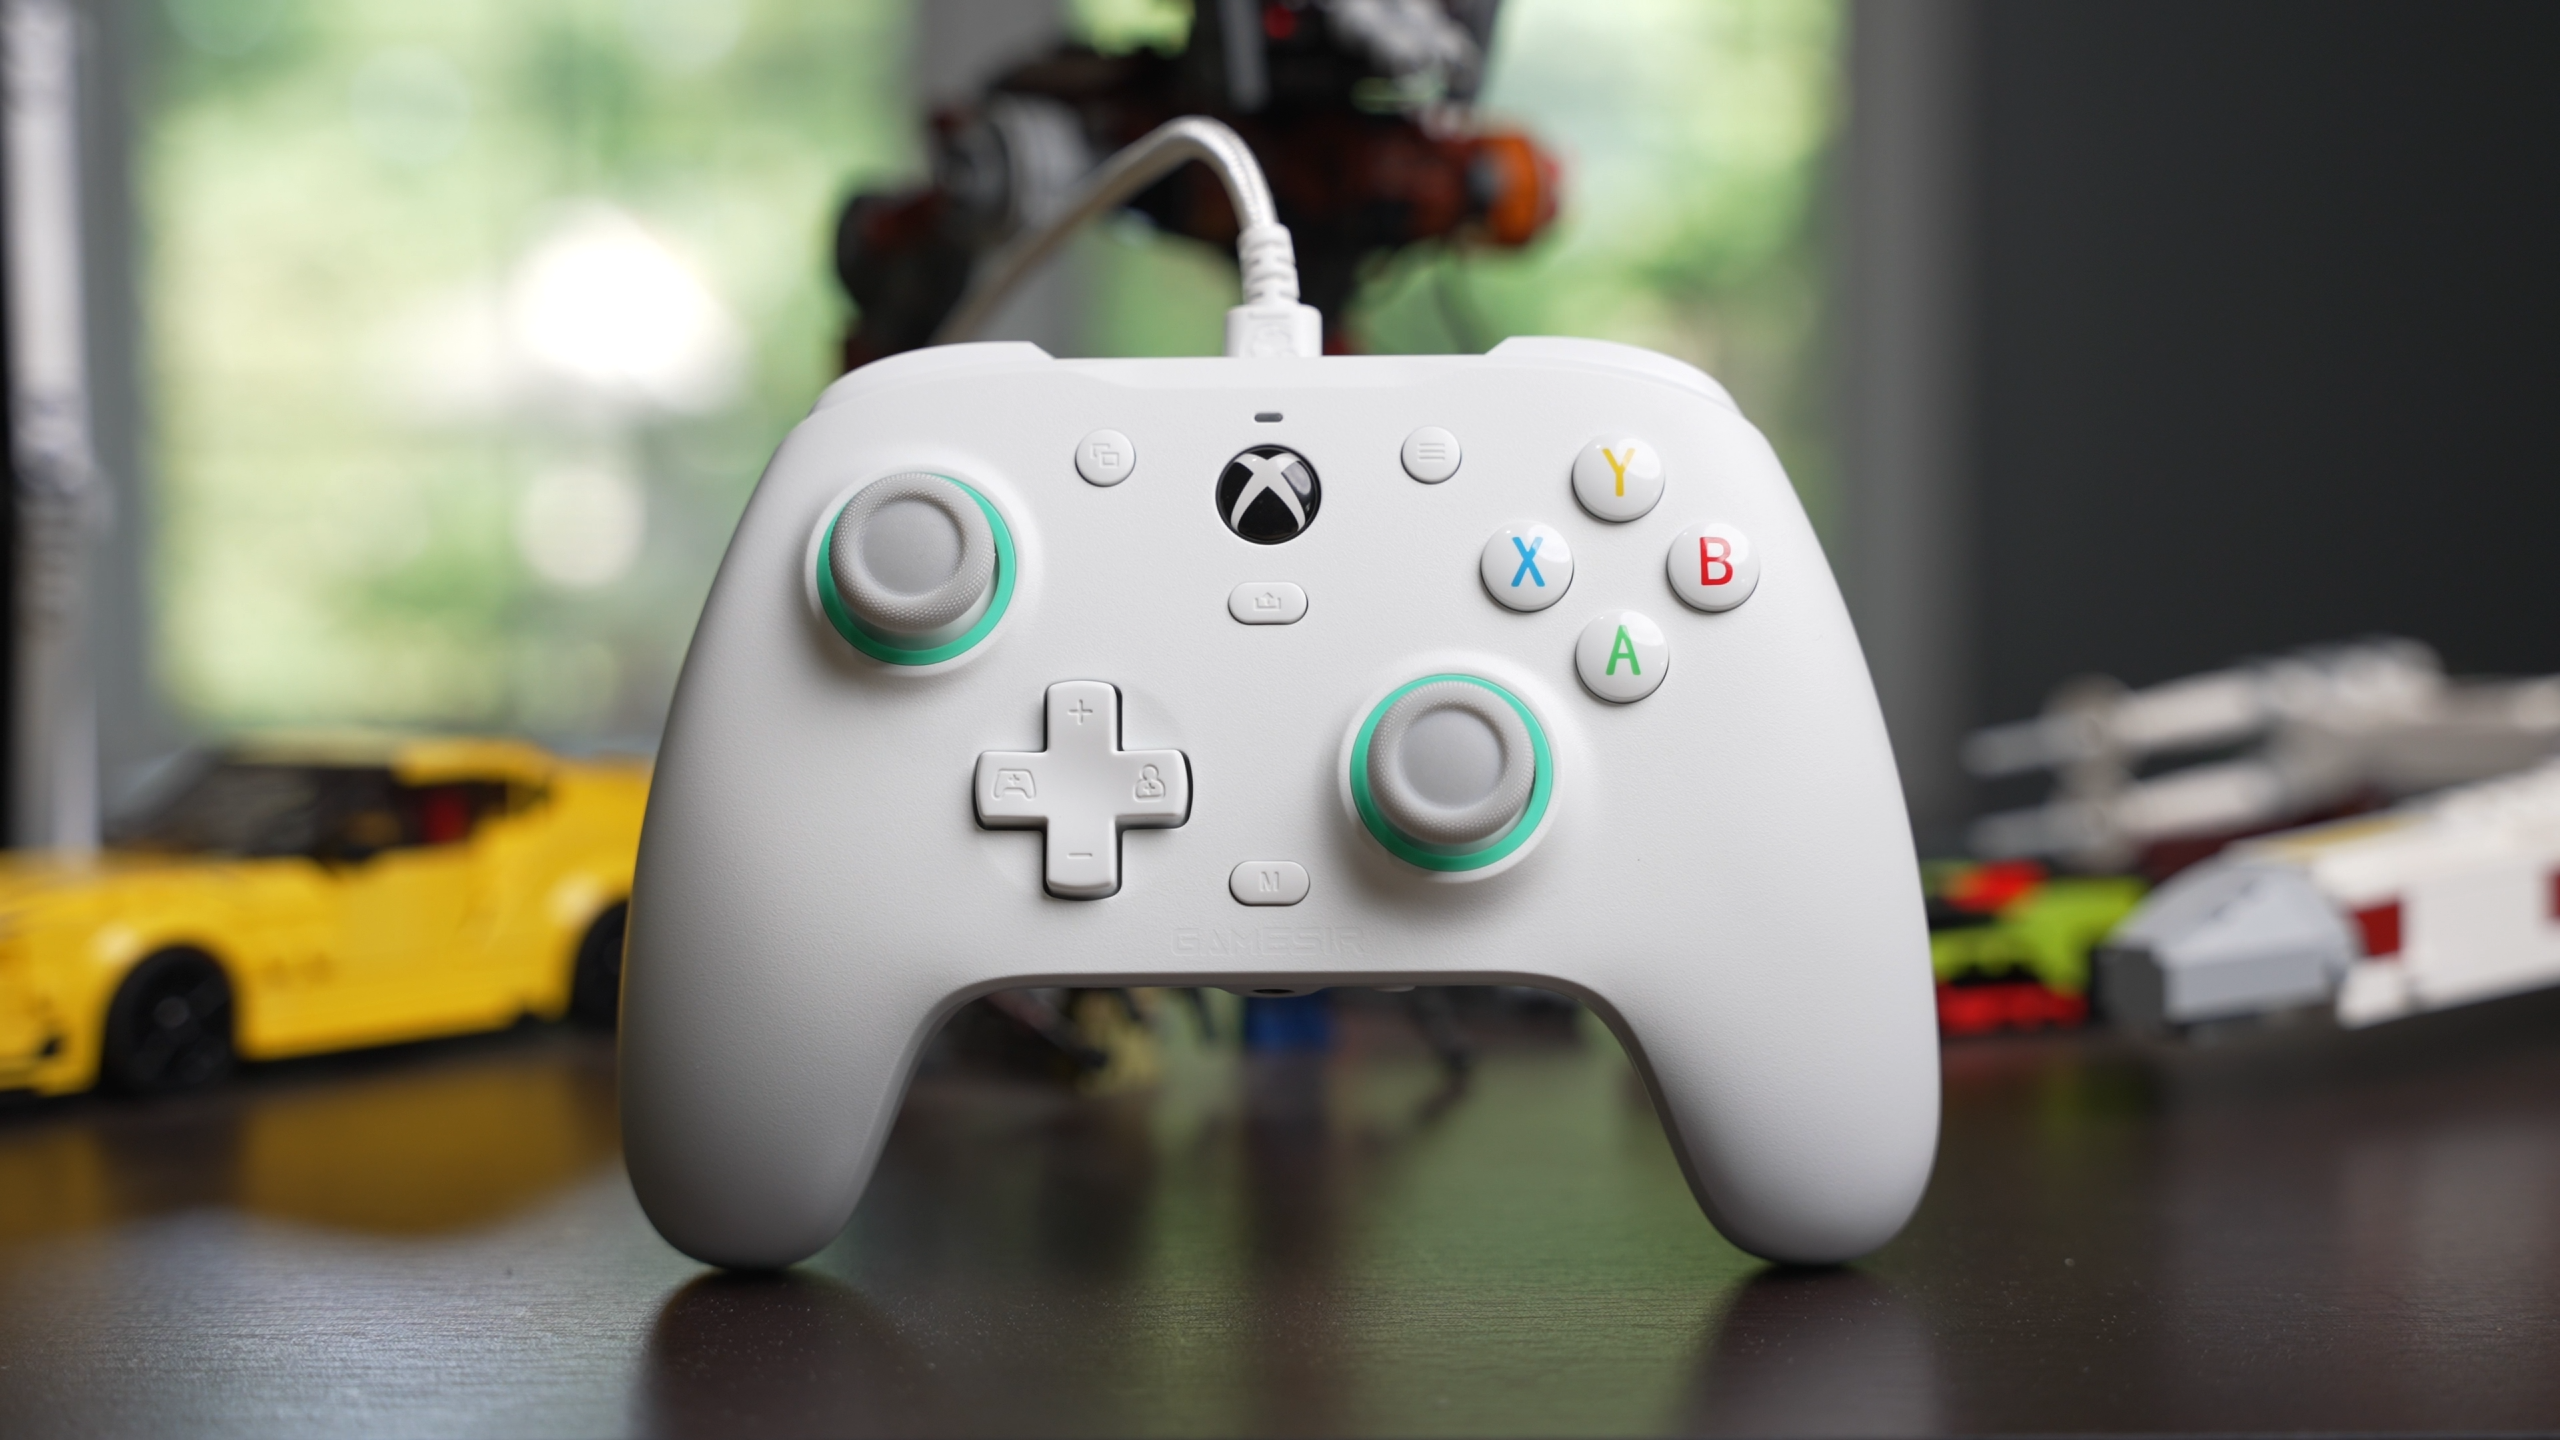 GAMESIR G7 Versus The XBOX Wireless Controller. The DEFINITIVE Comparison.  Which Is BETTER ? 